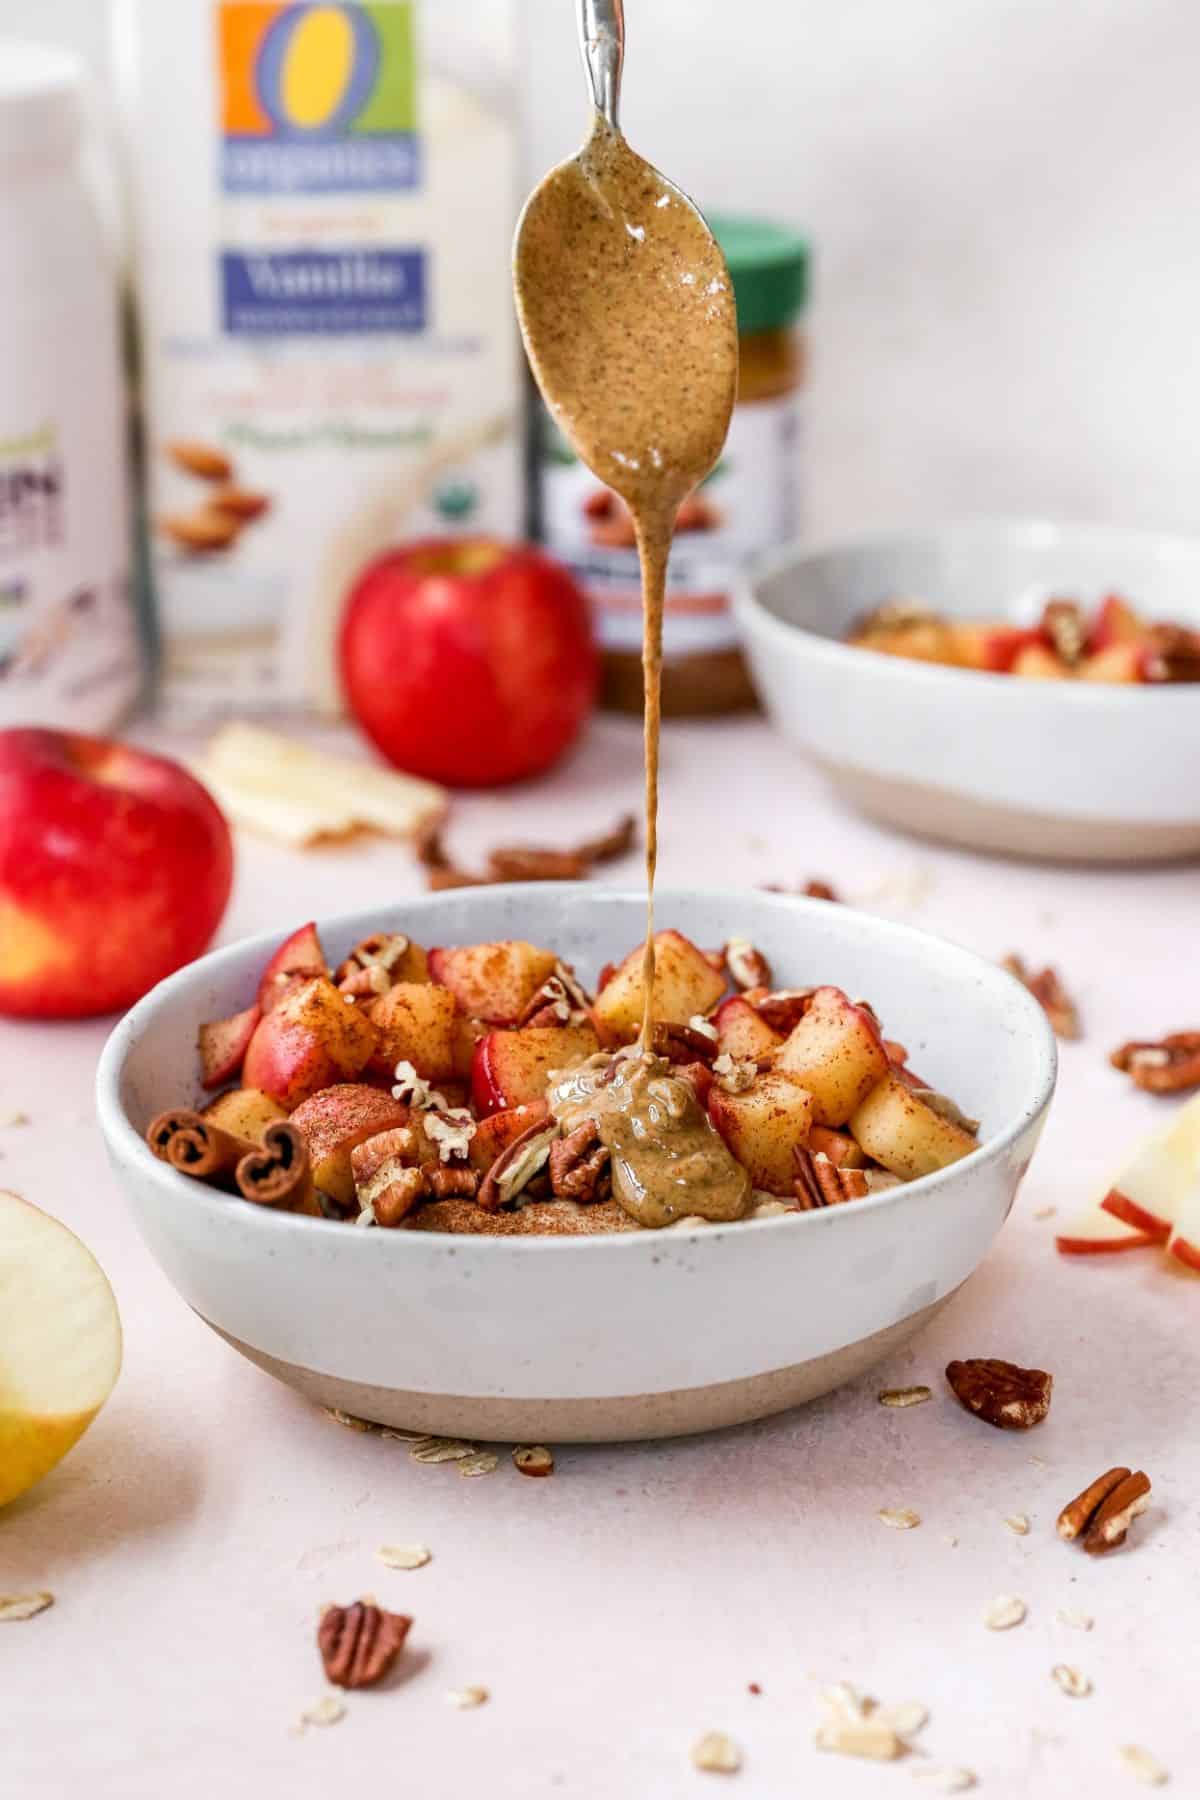 Drizzling almond butter over a bowl with apples and oatmeal.